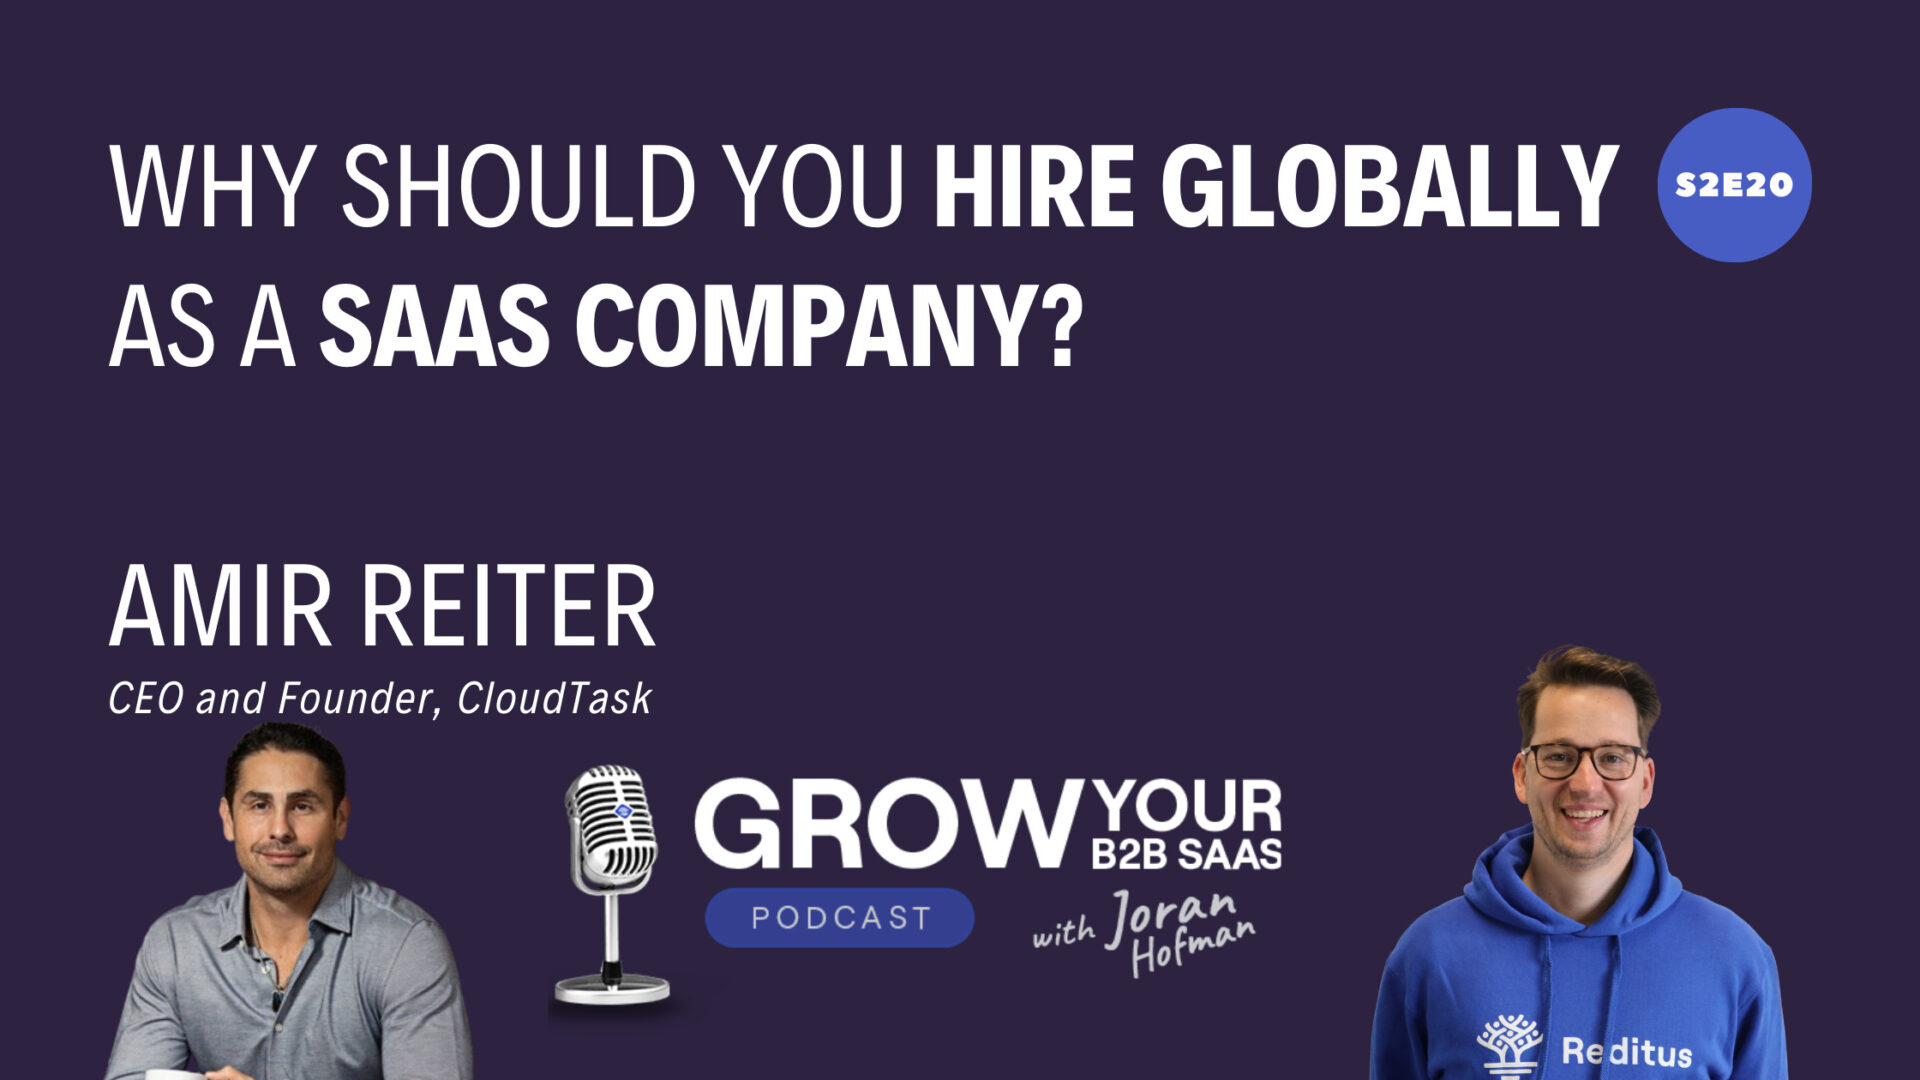 https://www.getreditus.com/podcast/s2e20-why-you-should-hire-globally-as-a-saas-company-with-amir-reiter/